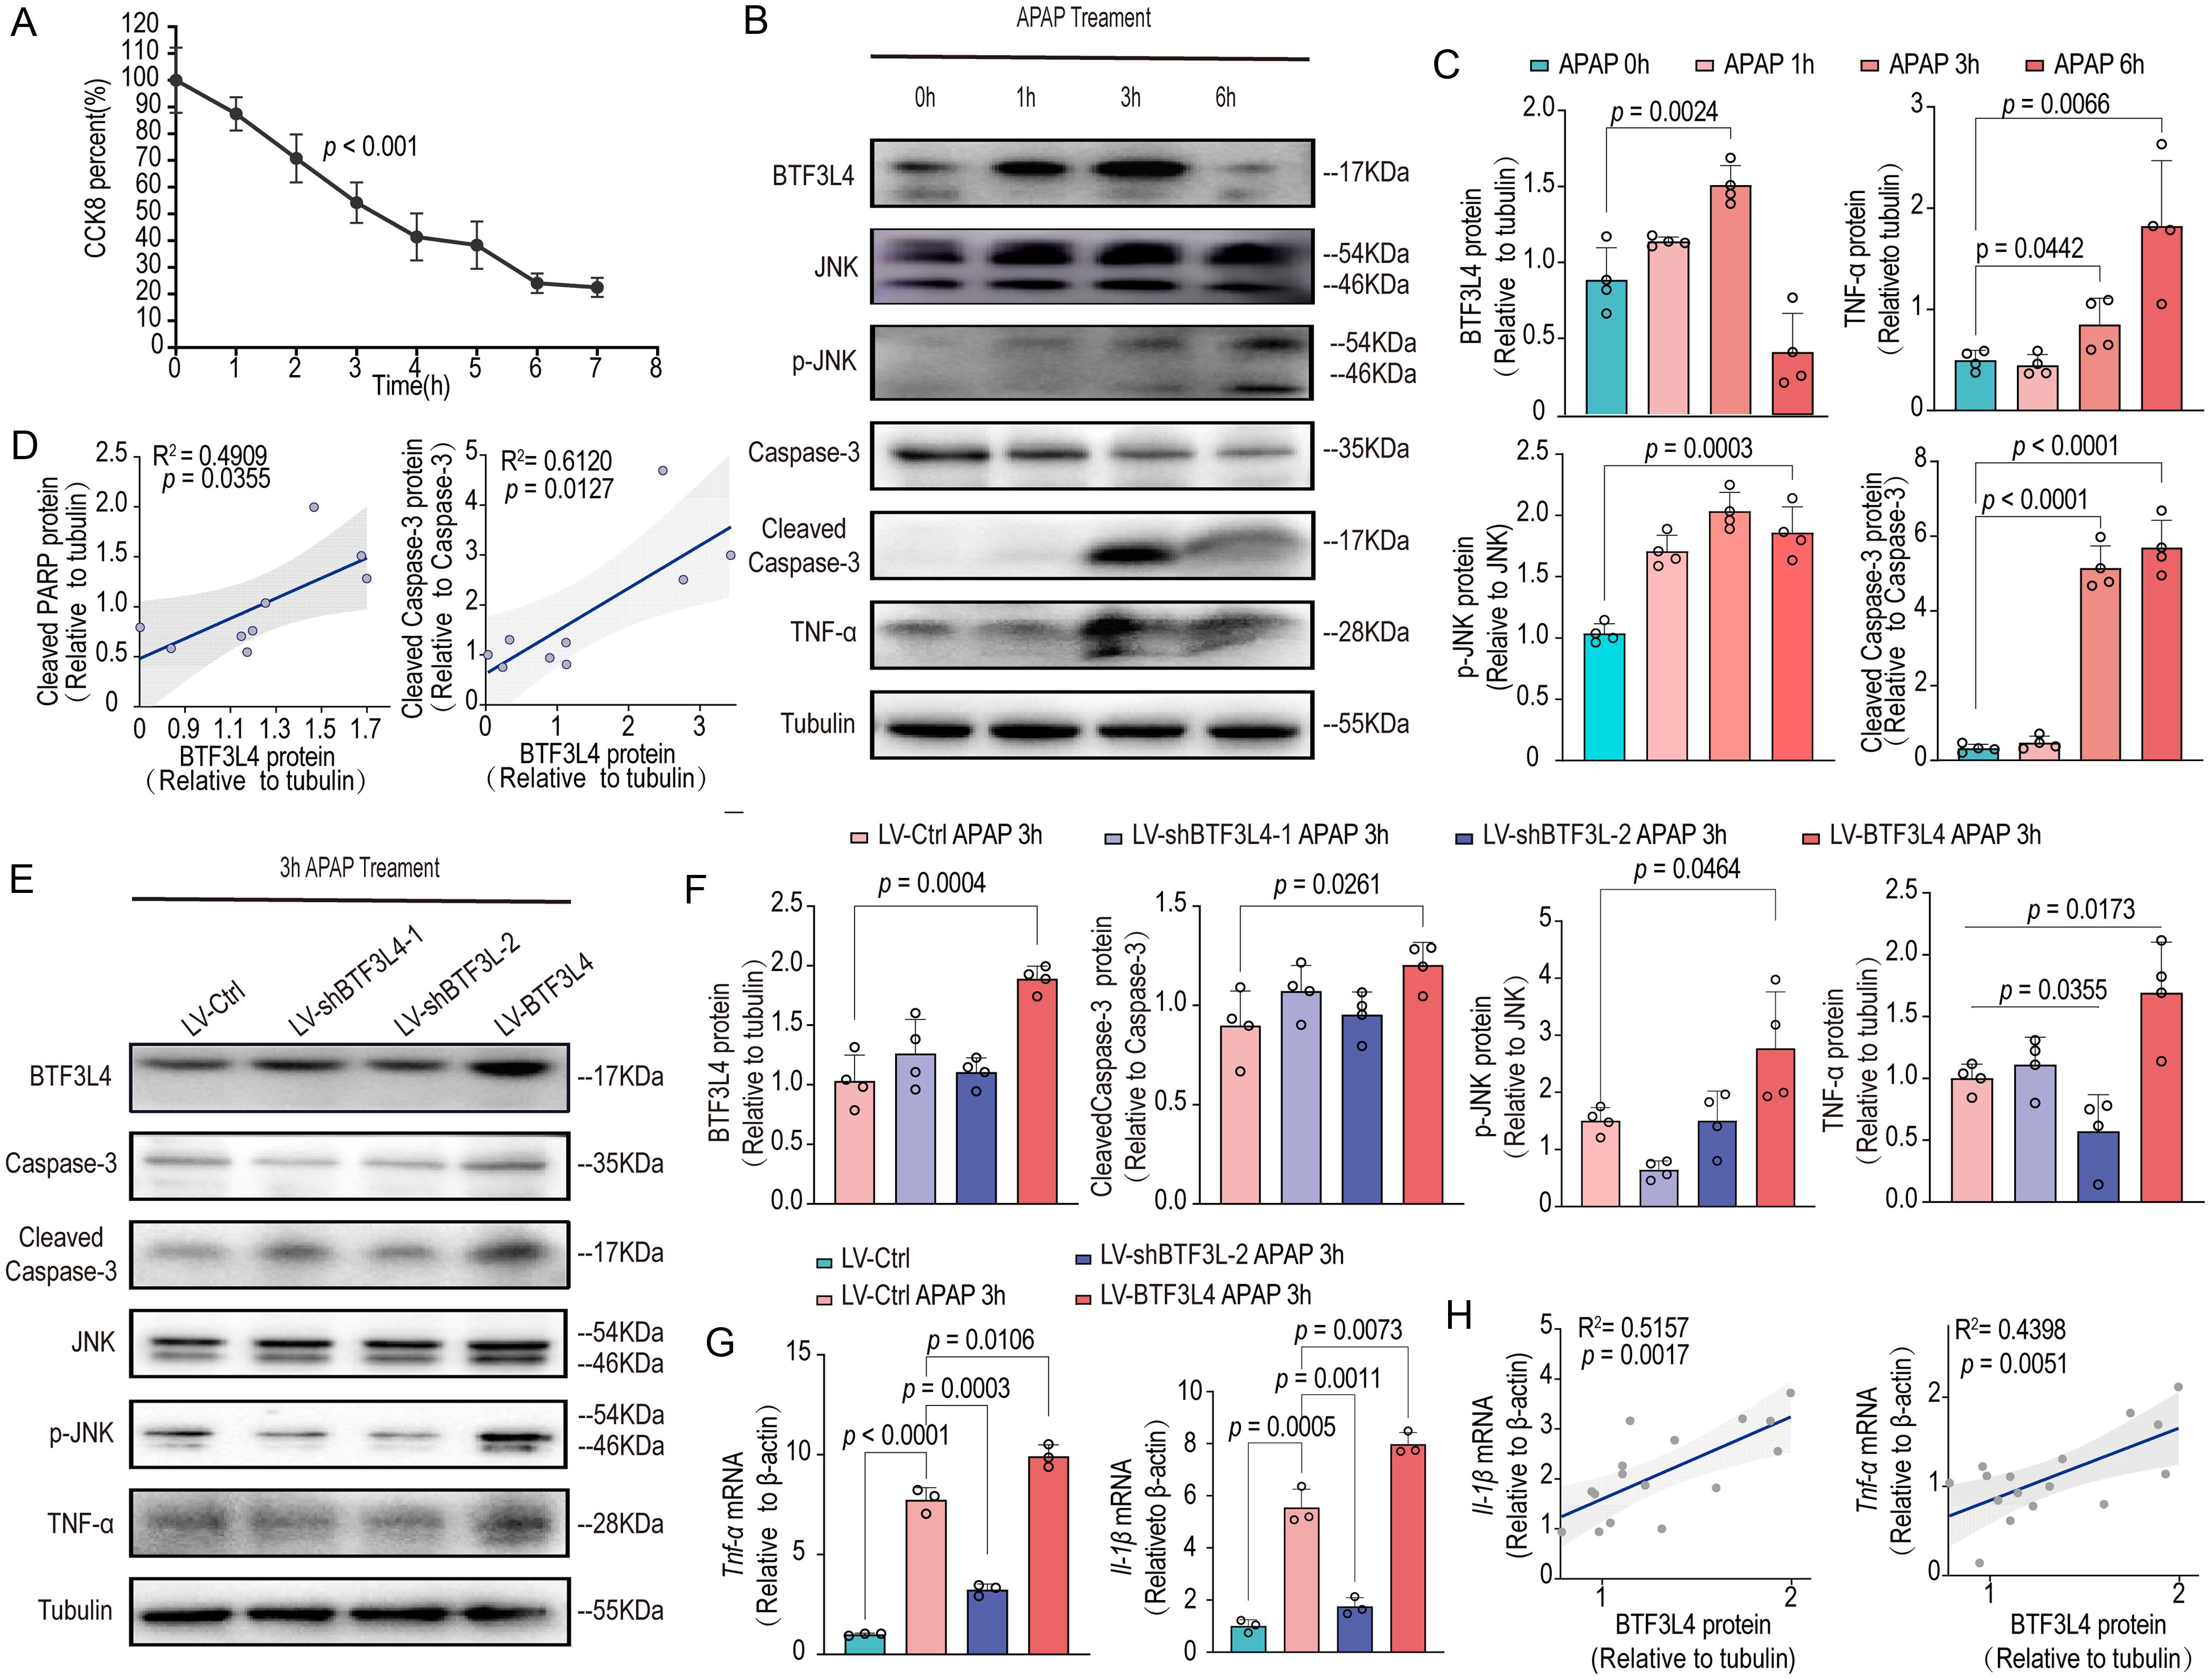 Overexpression of BTF3L4 accelerates cellular injury in an APAP-induced cellular model.